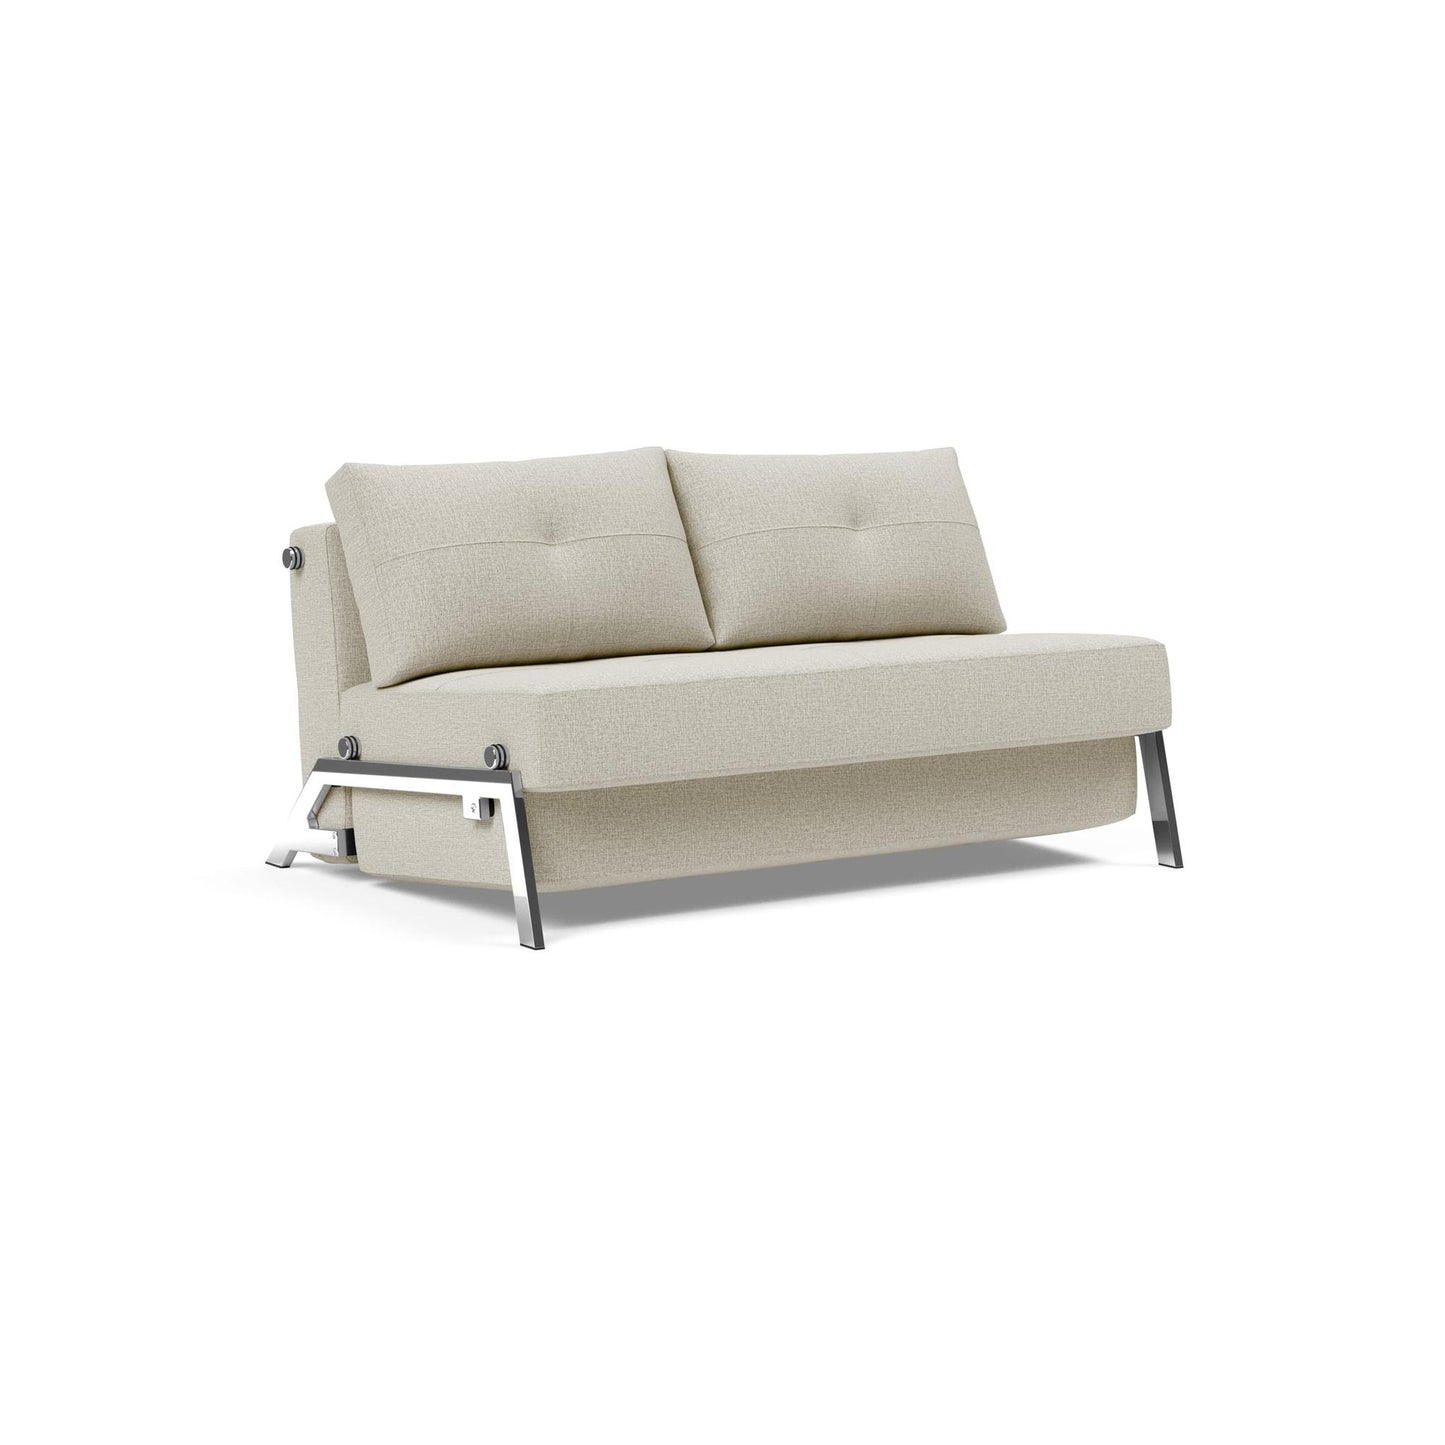 Cubed Deluxe Full Sofa Bed in Mixed Dance Natural